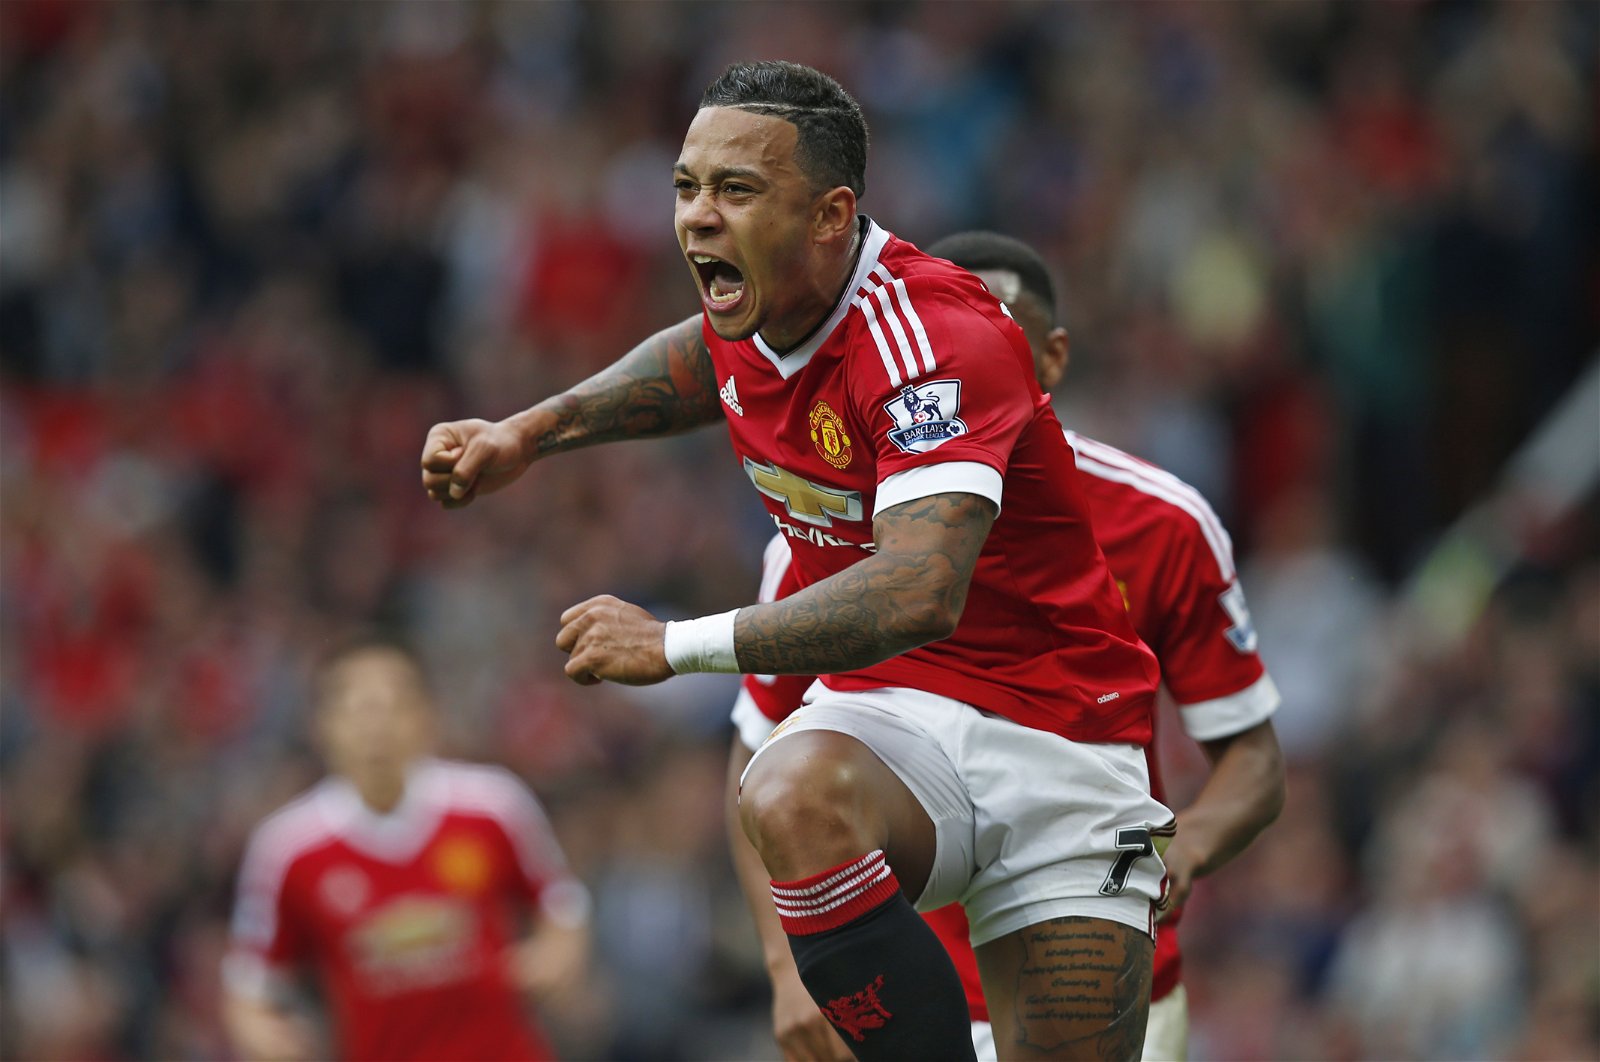 Manchester United have first refusal on former flop Memphis Depay